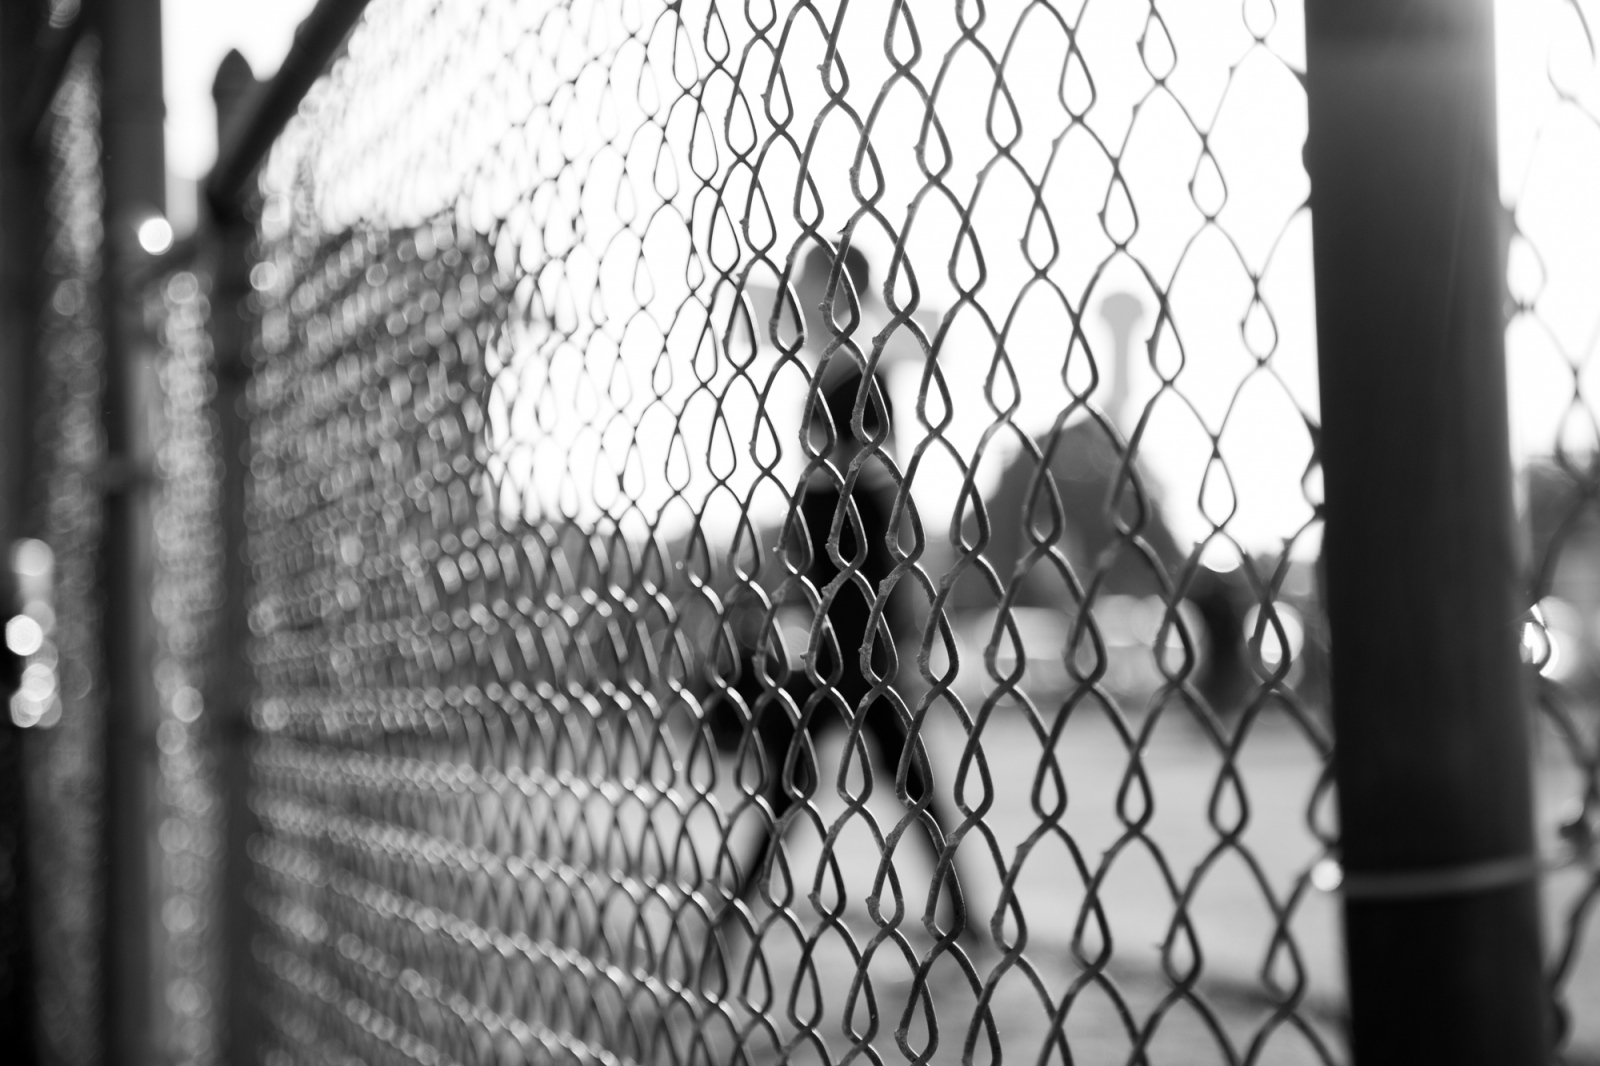 This Timeless Game - Player as seen through dugout chainlink fence.  